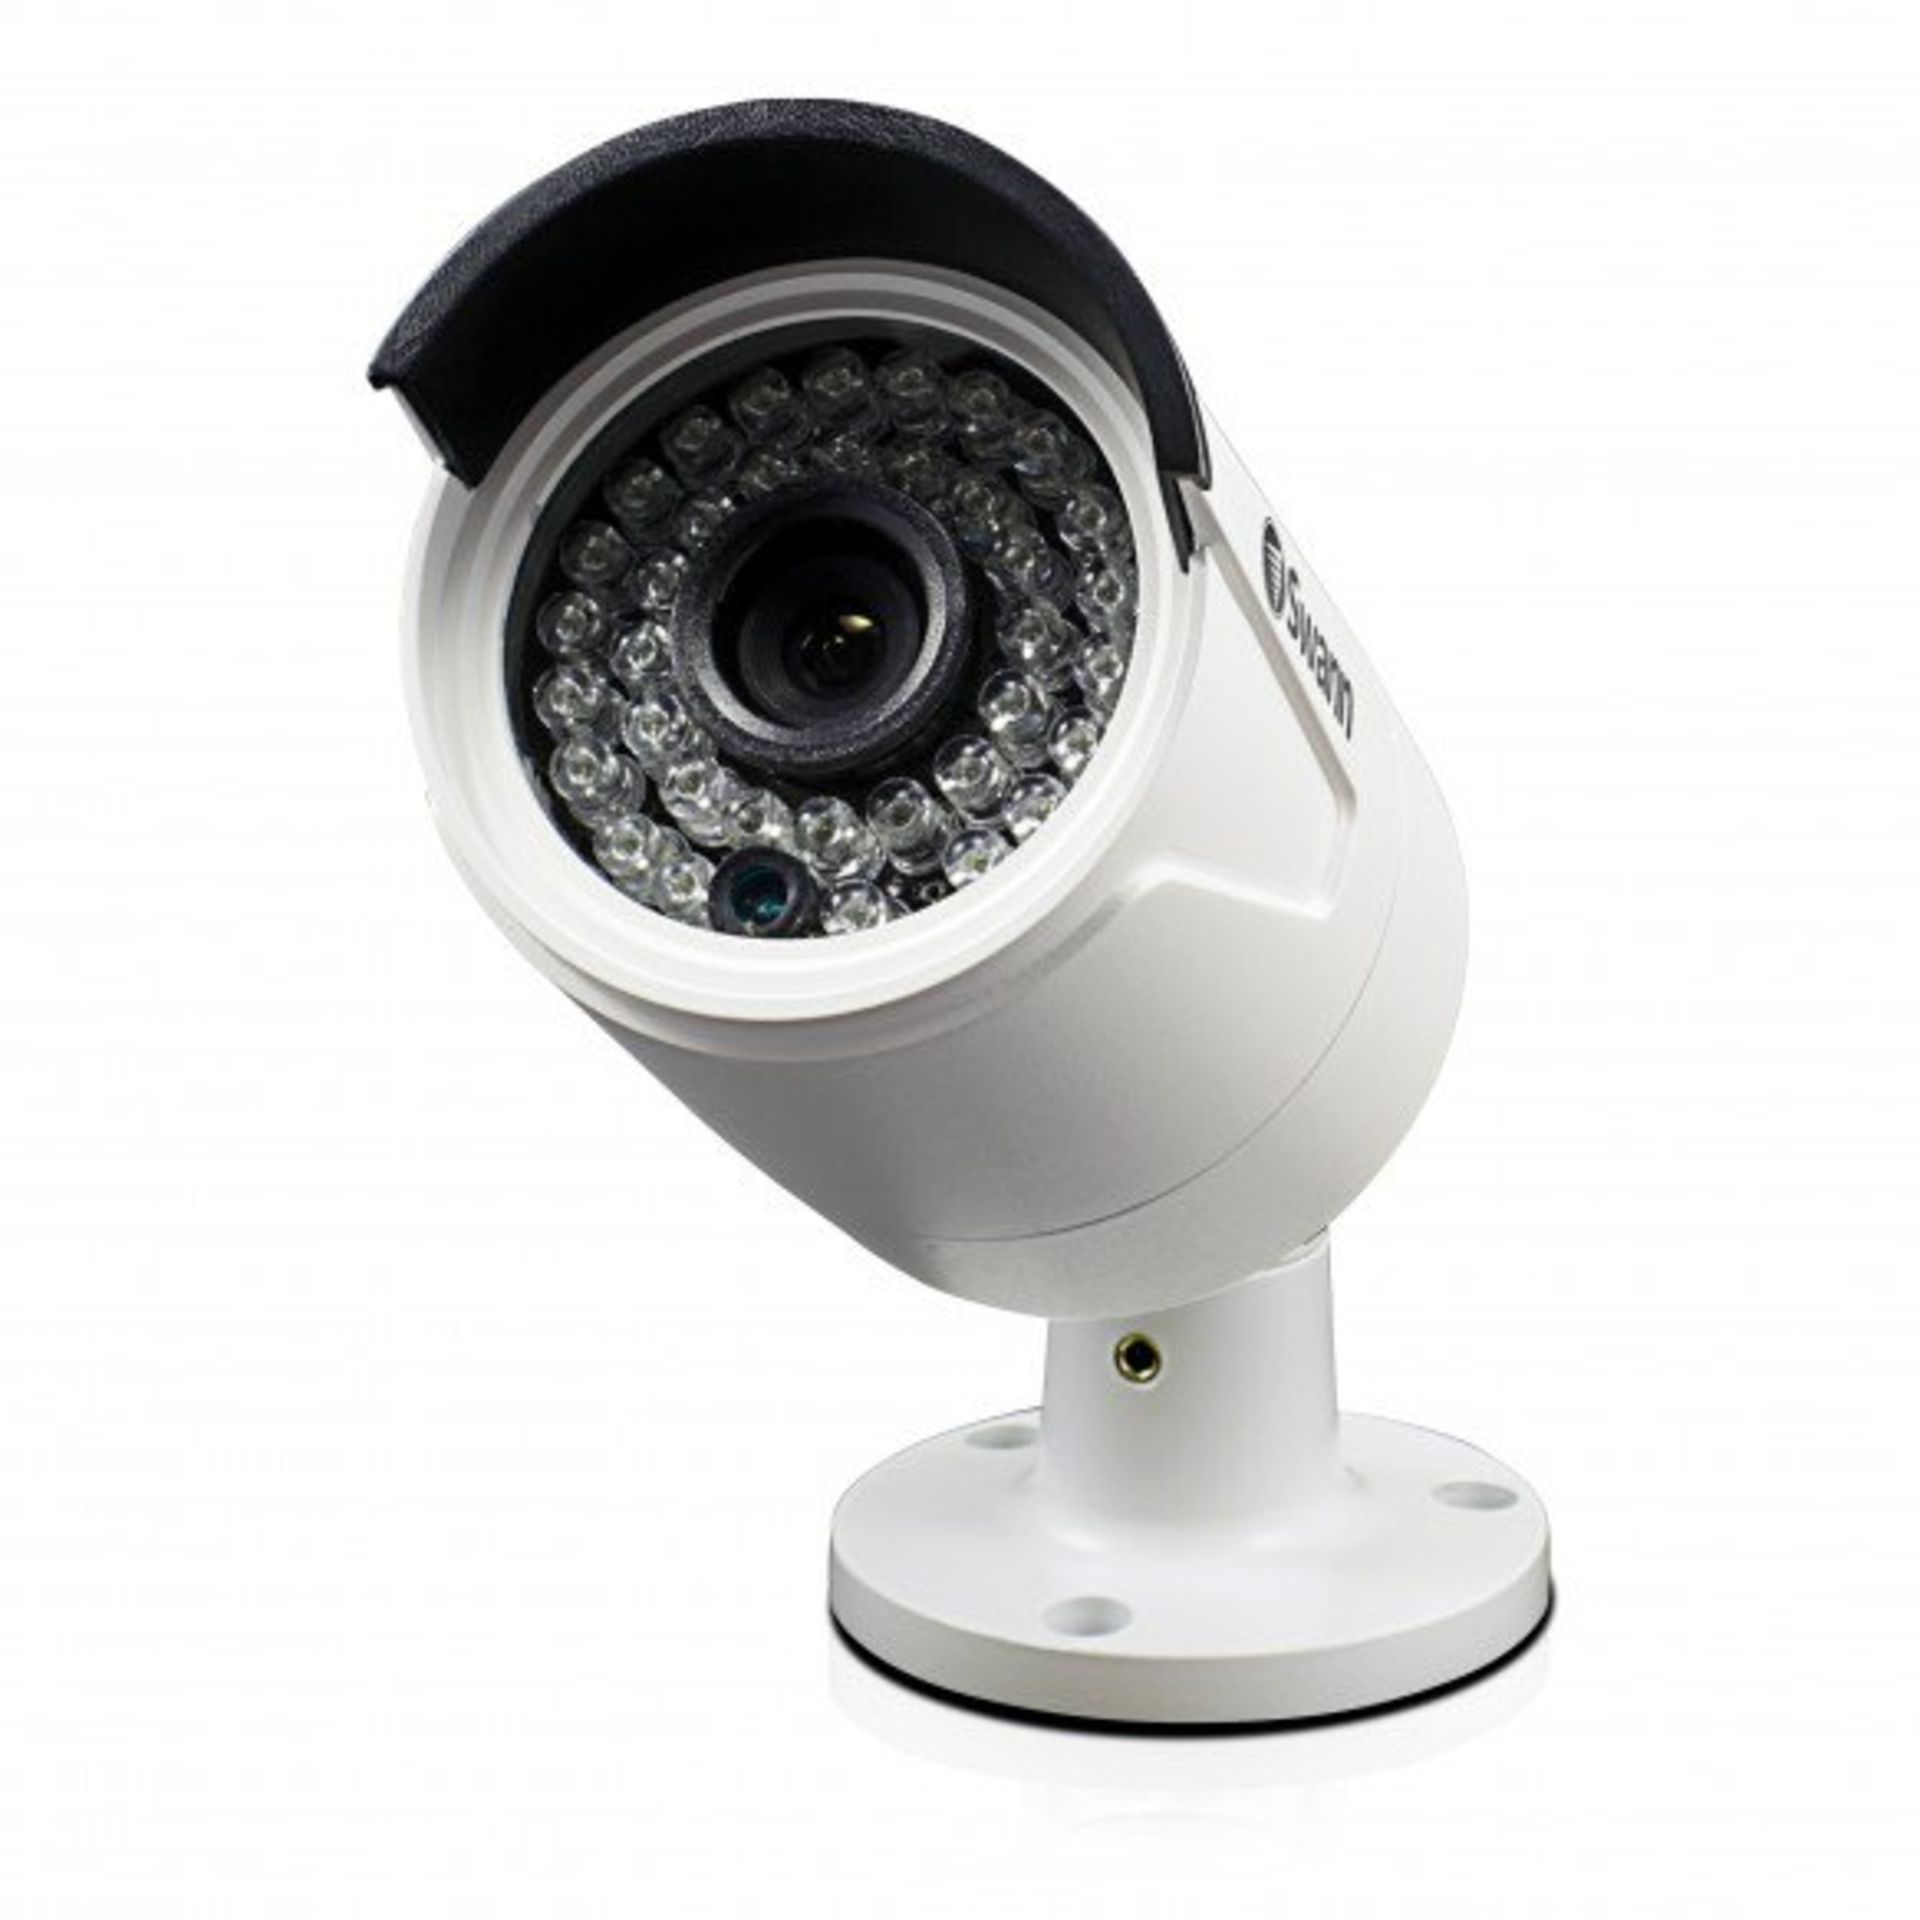 V *TRADE QTY* Grade A Swann 818CAM Super HD Day/Night Security Camera - Night Vision 100ft - IP66